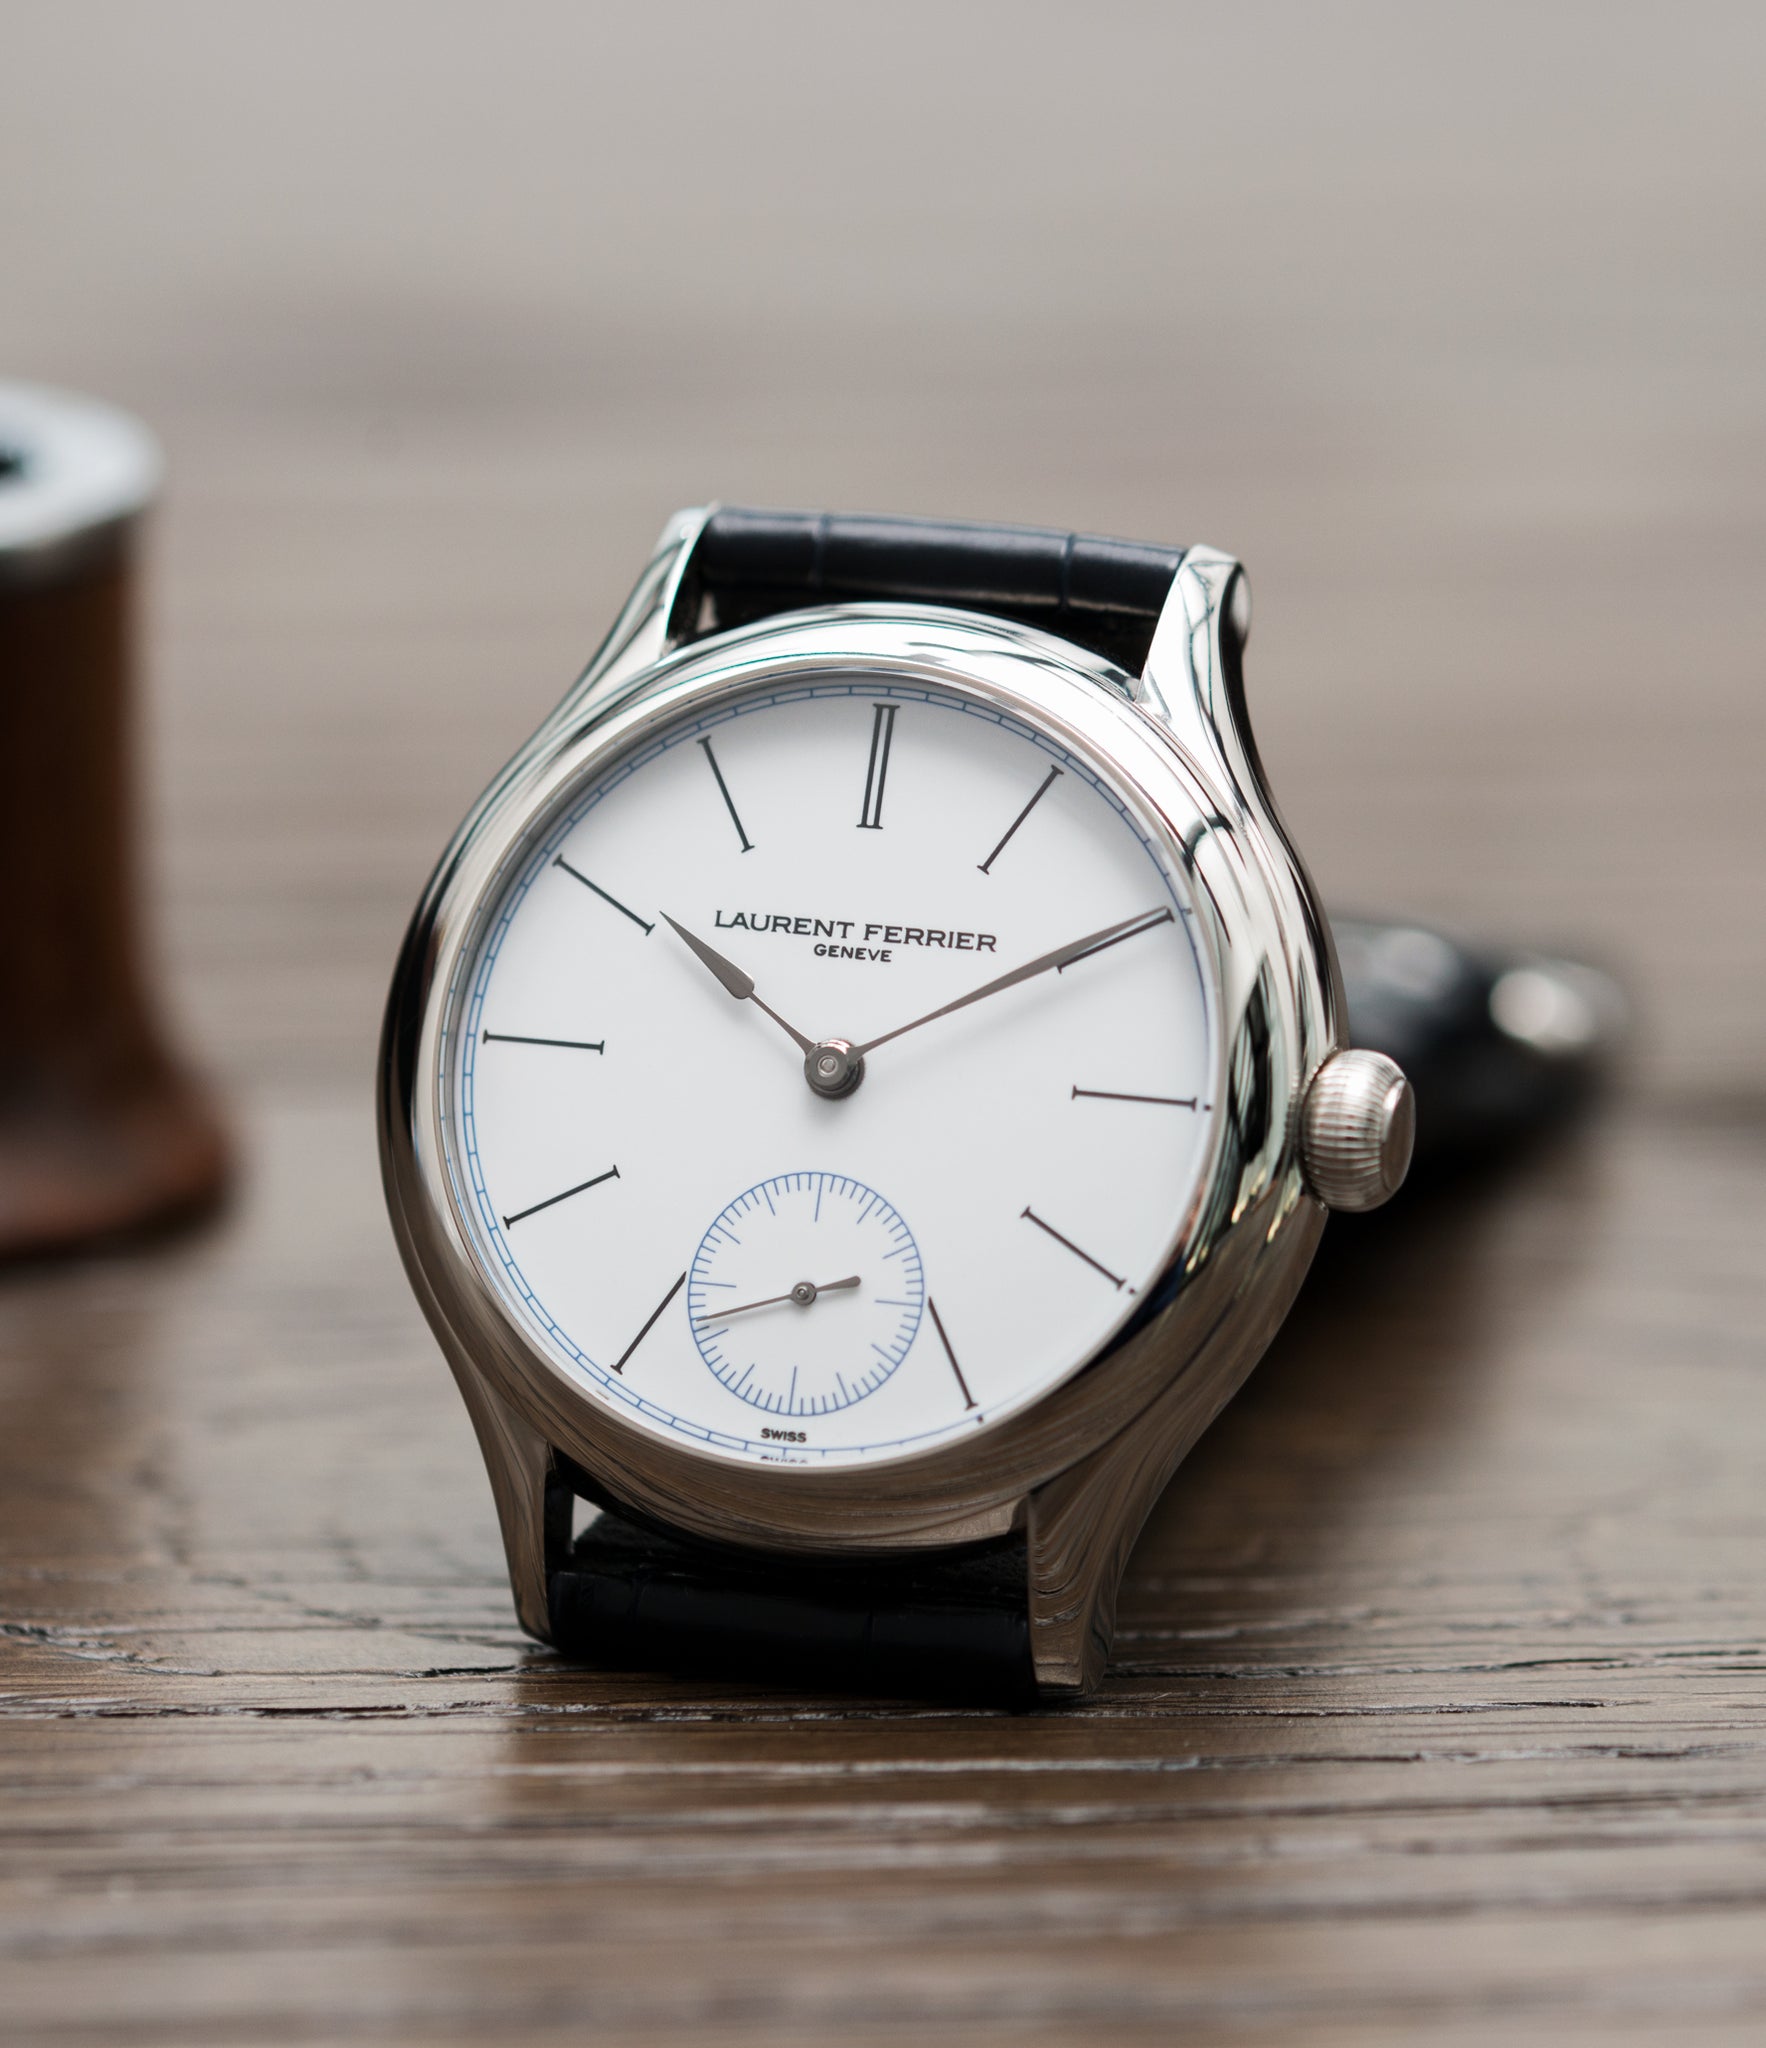 selling Laurent Ferrier Galet Micro-Rotor FBN 230.02 Enamel dial steel watch for sale online at A Collected Man London UK approved seller of independent watchmaker Laurent Ferrier